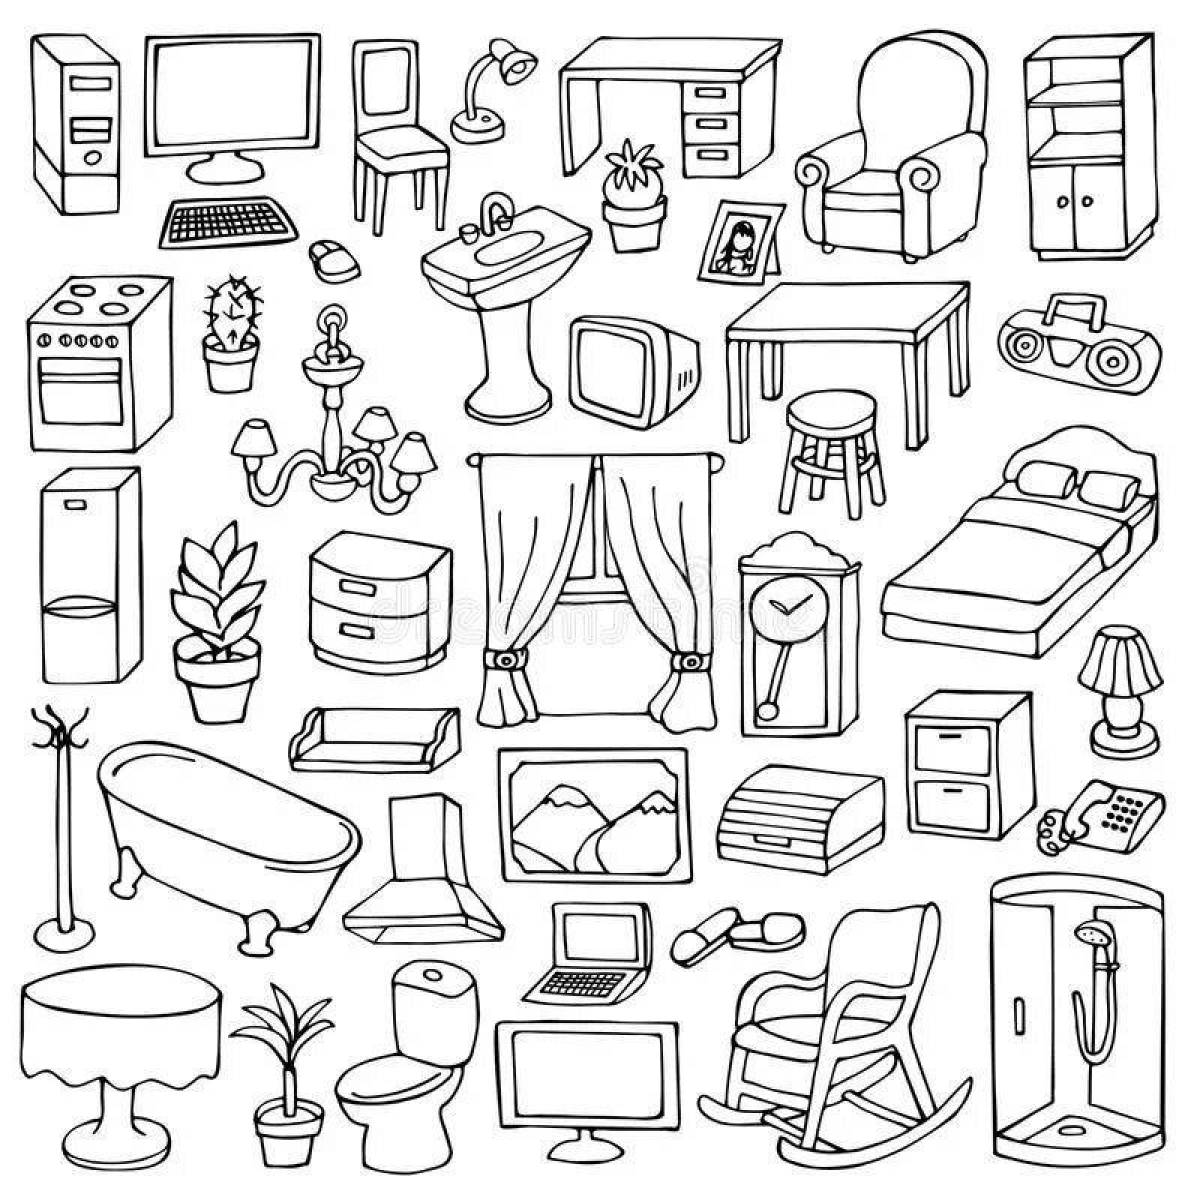 Coloring book charming pieces of furniture